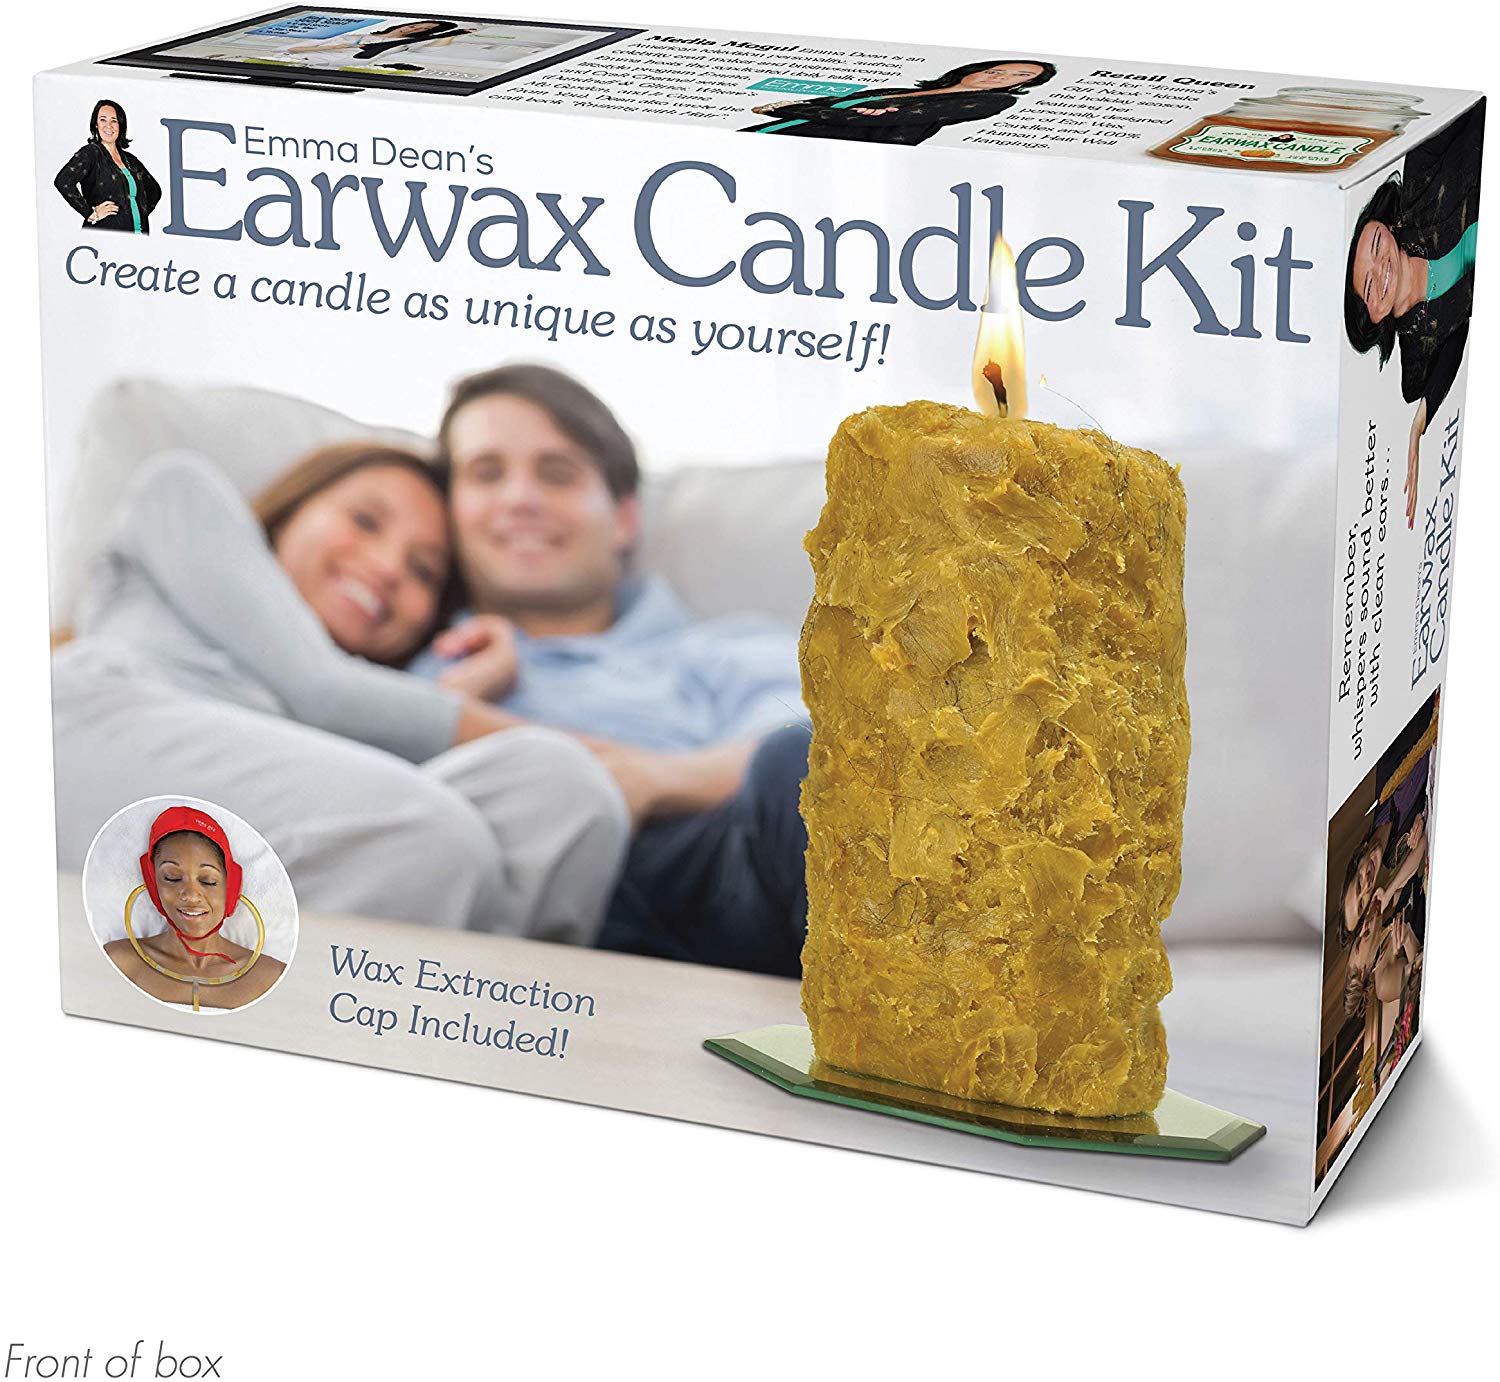 Prank Pack “Earwax Candle Kit”